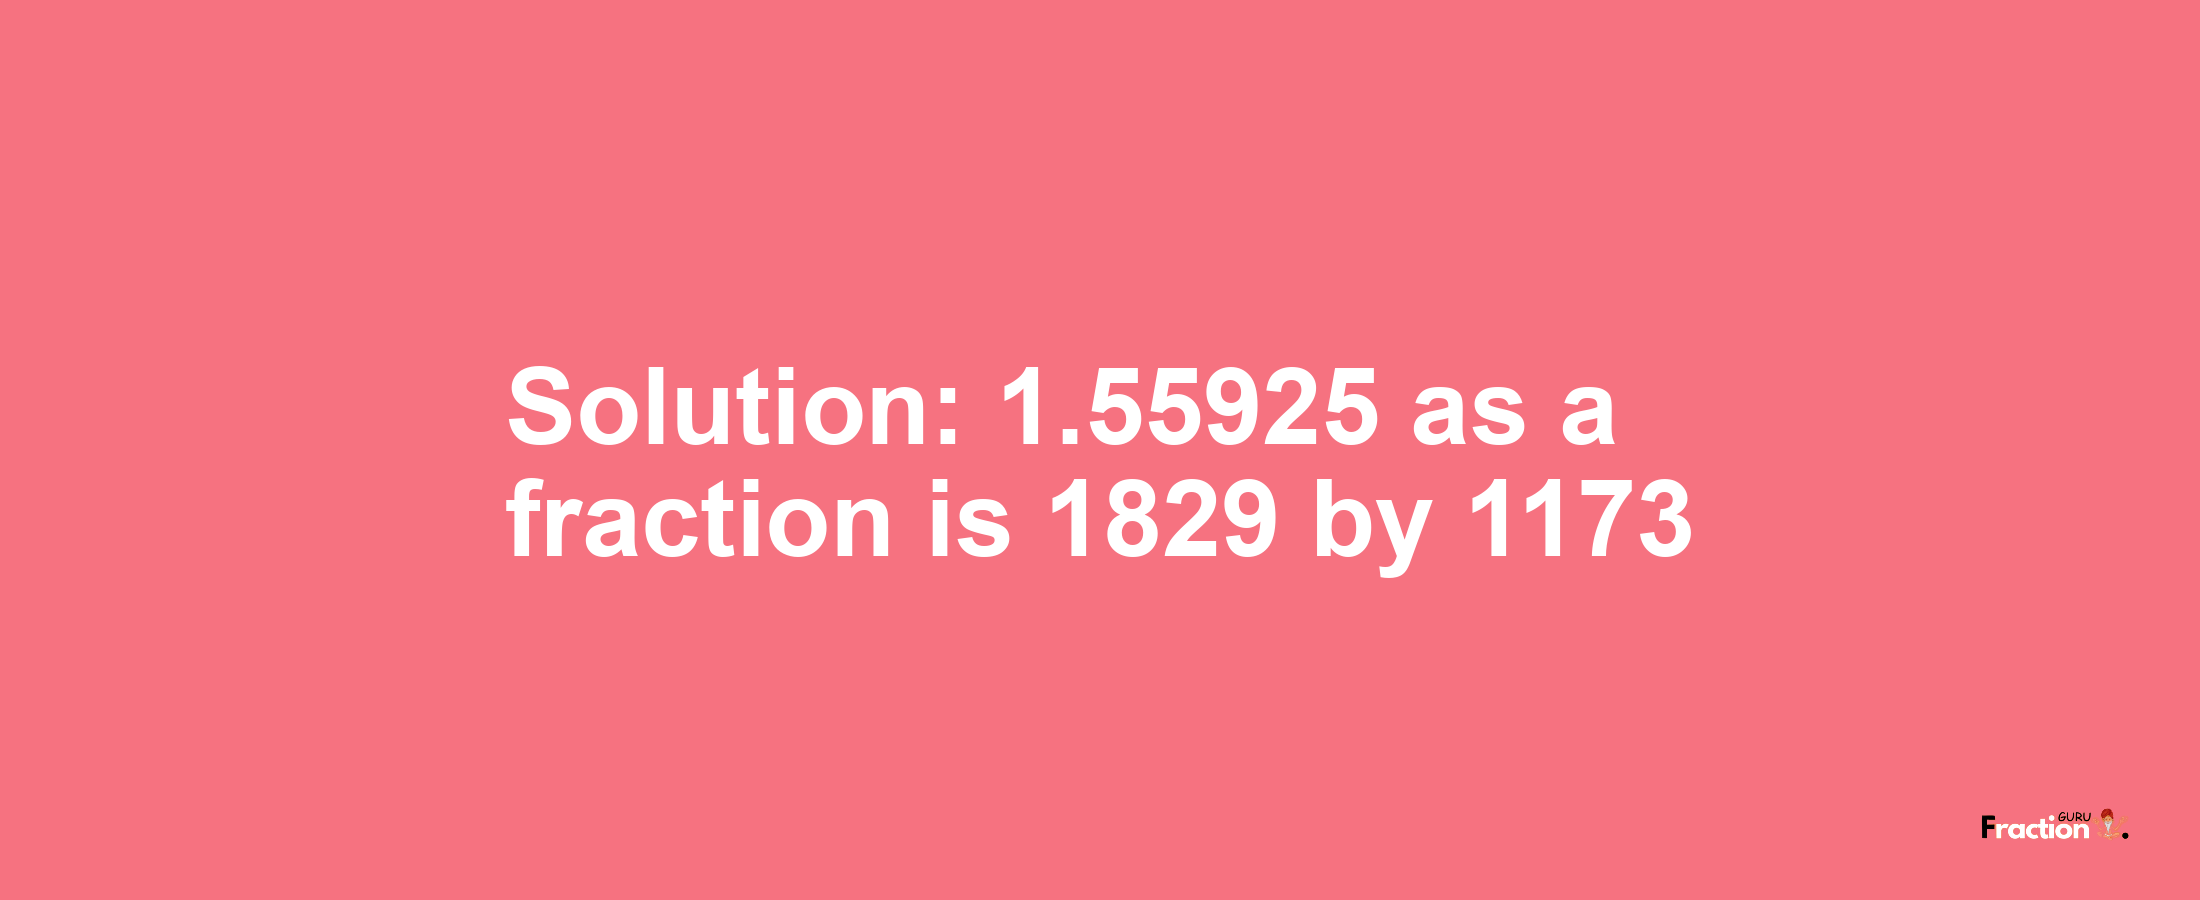 Solution:1.55925 as a fraction is 1829/1173